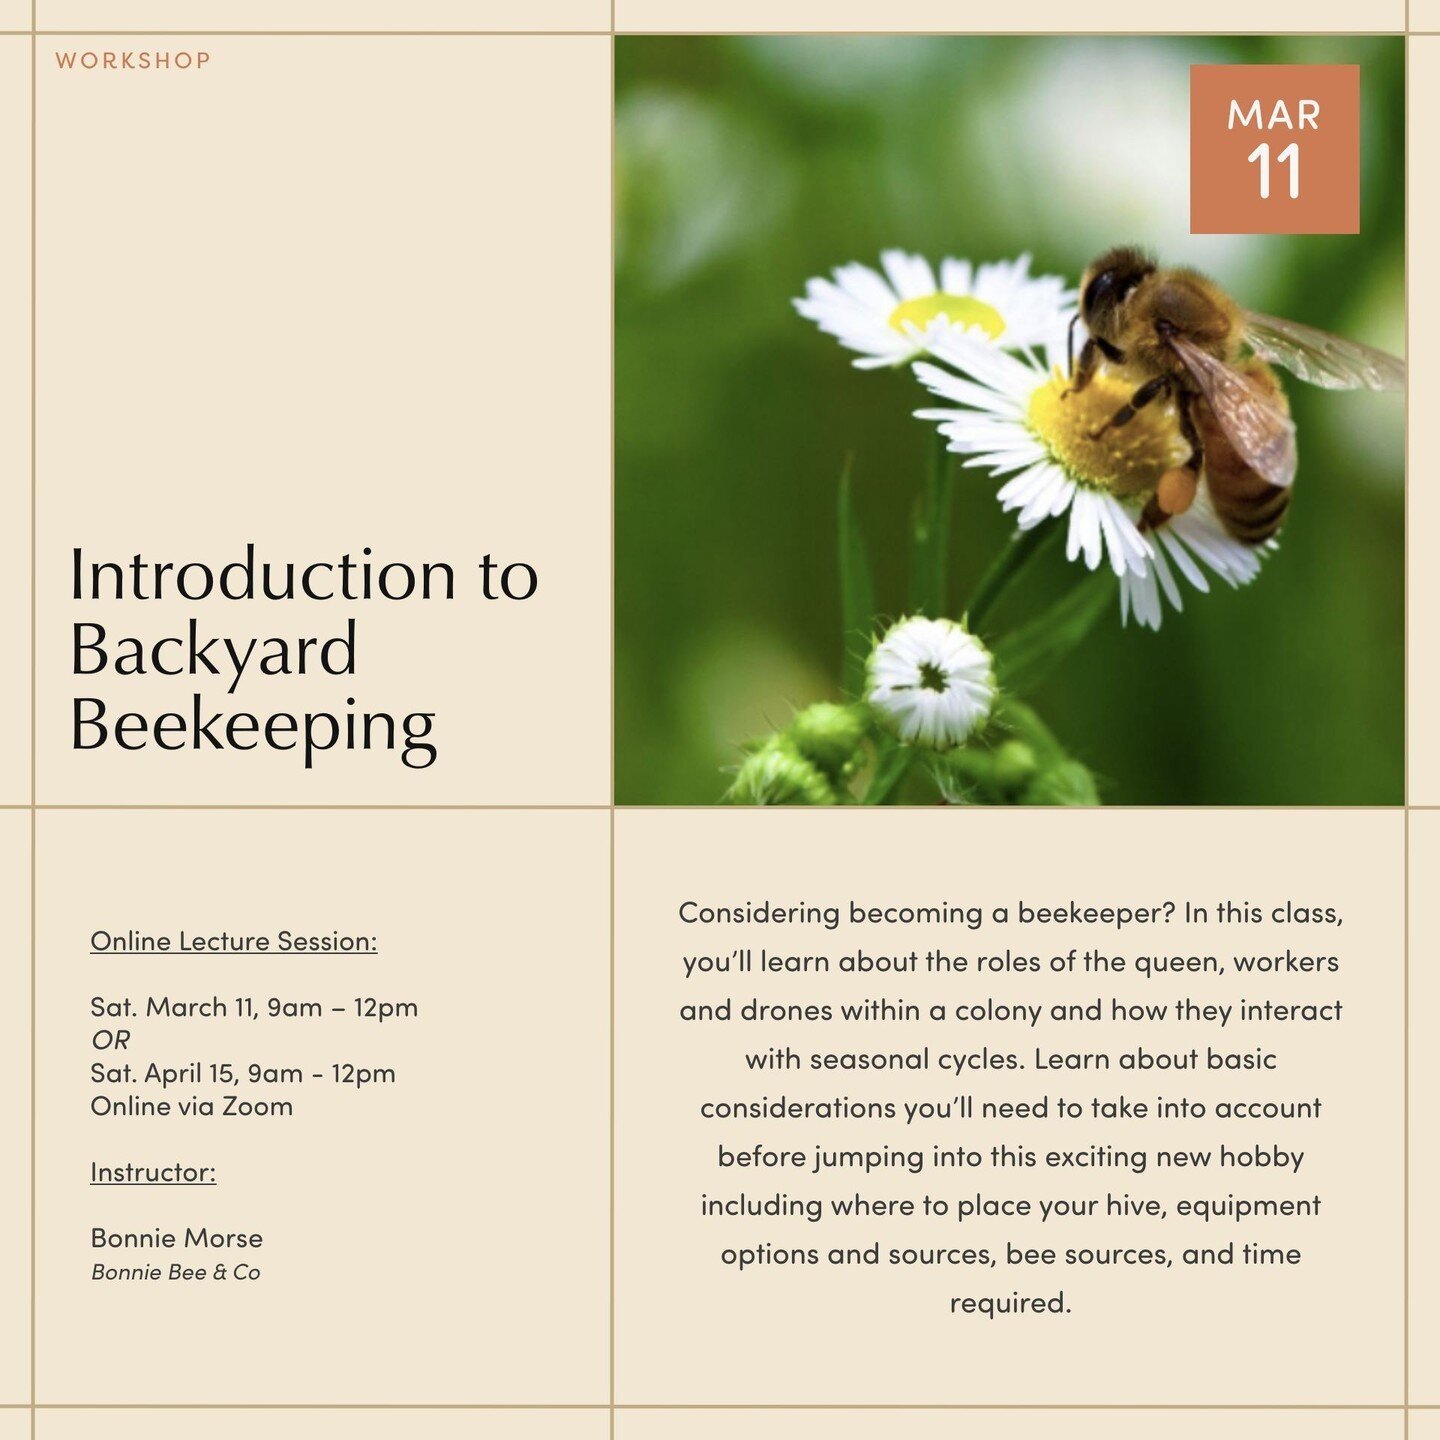 Considering becoming a beekeeper? 🍯🌸🐝
In this class, you&rsquo;ll learn about the roles of the queen, workers and drones within a colony and how they interact with seasonal cycles. Learn about basic considerations you&rsquo;ll need to take into ac